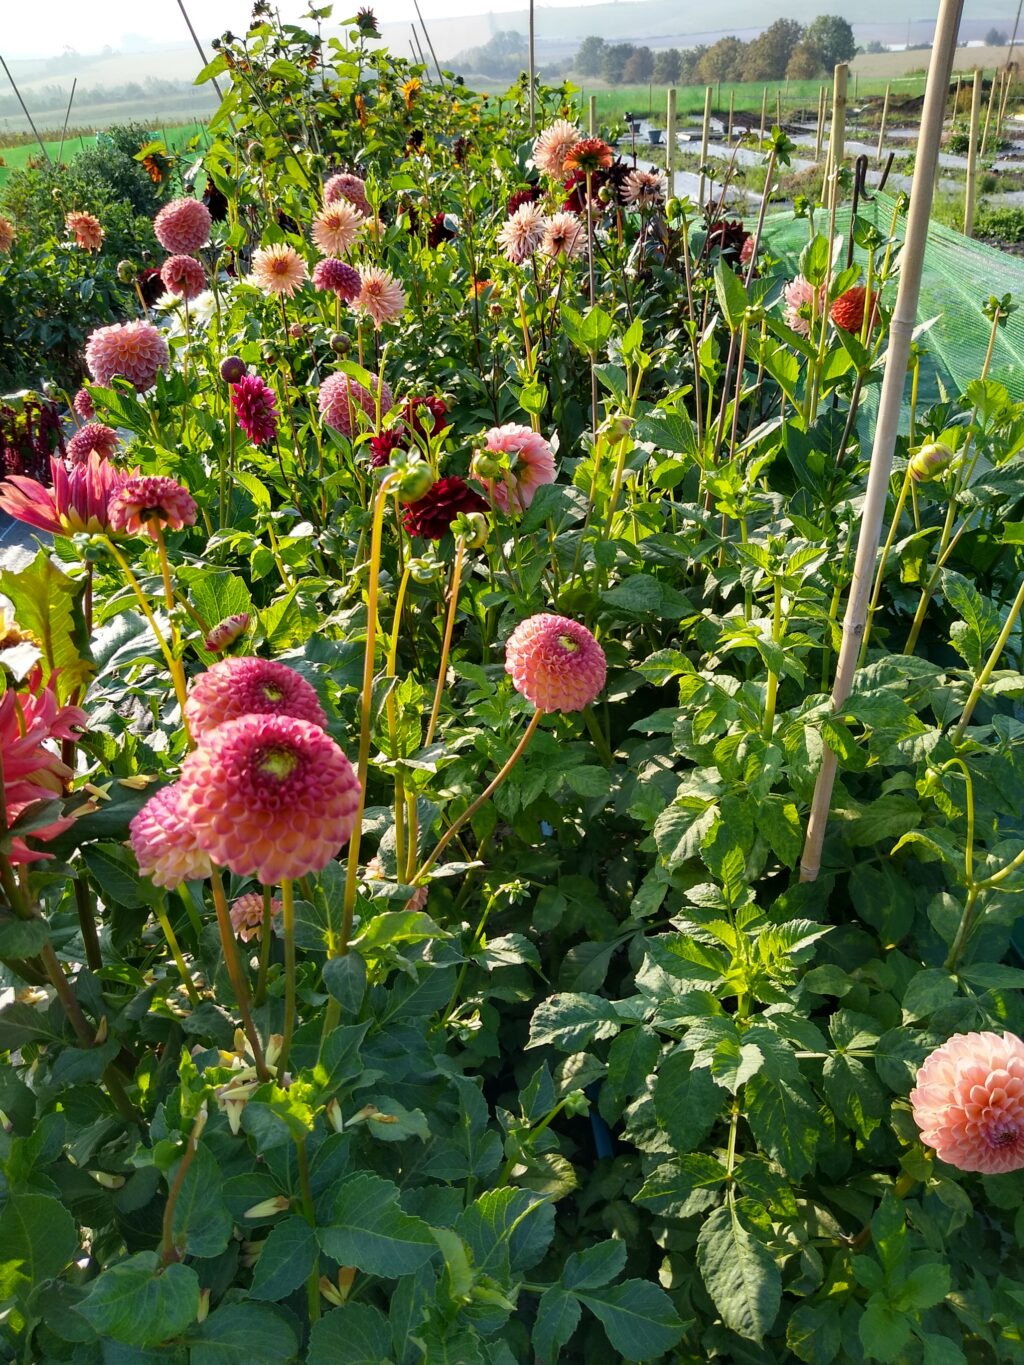 Peach pom pom dahlias seen here growing in the flower field at Nature's Posy.